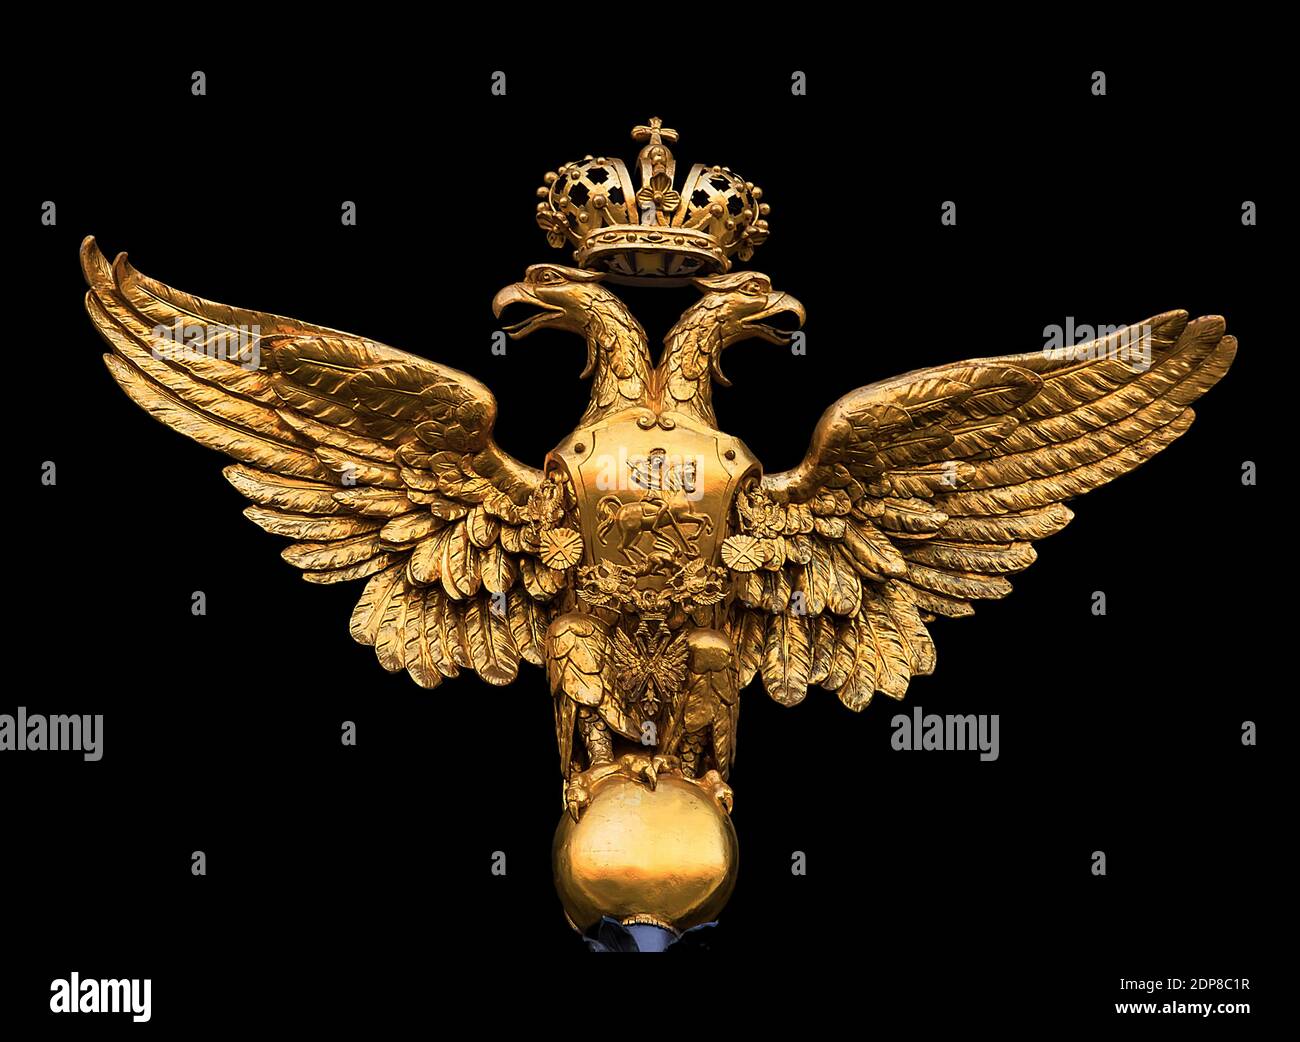 Russian Double Headed Eagle the coat of arms of Russian Empire Emblem  isolated in black background Stock Photo - Alamy